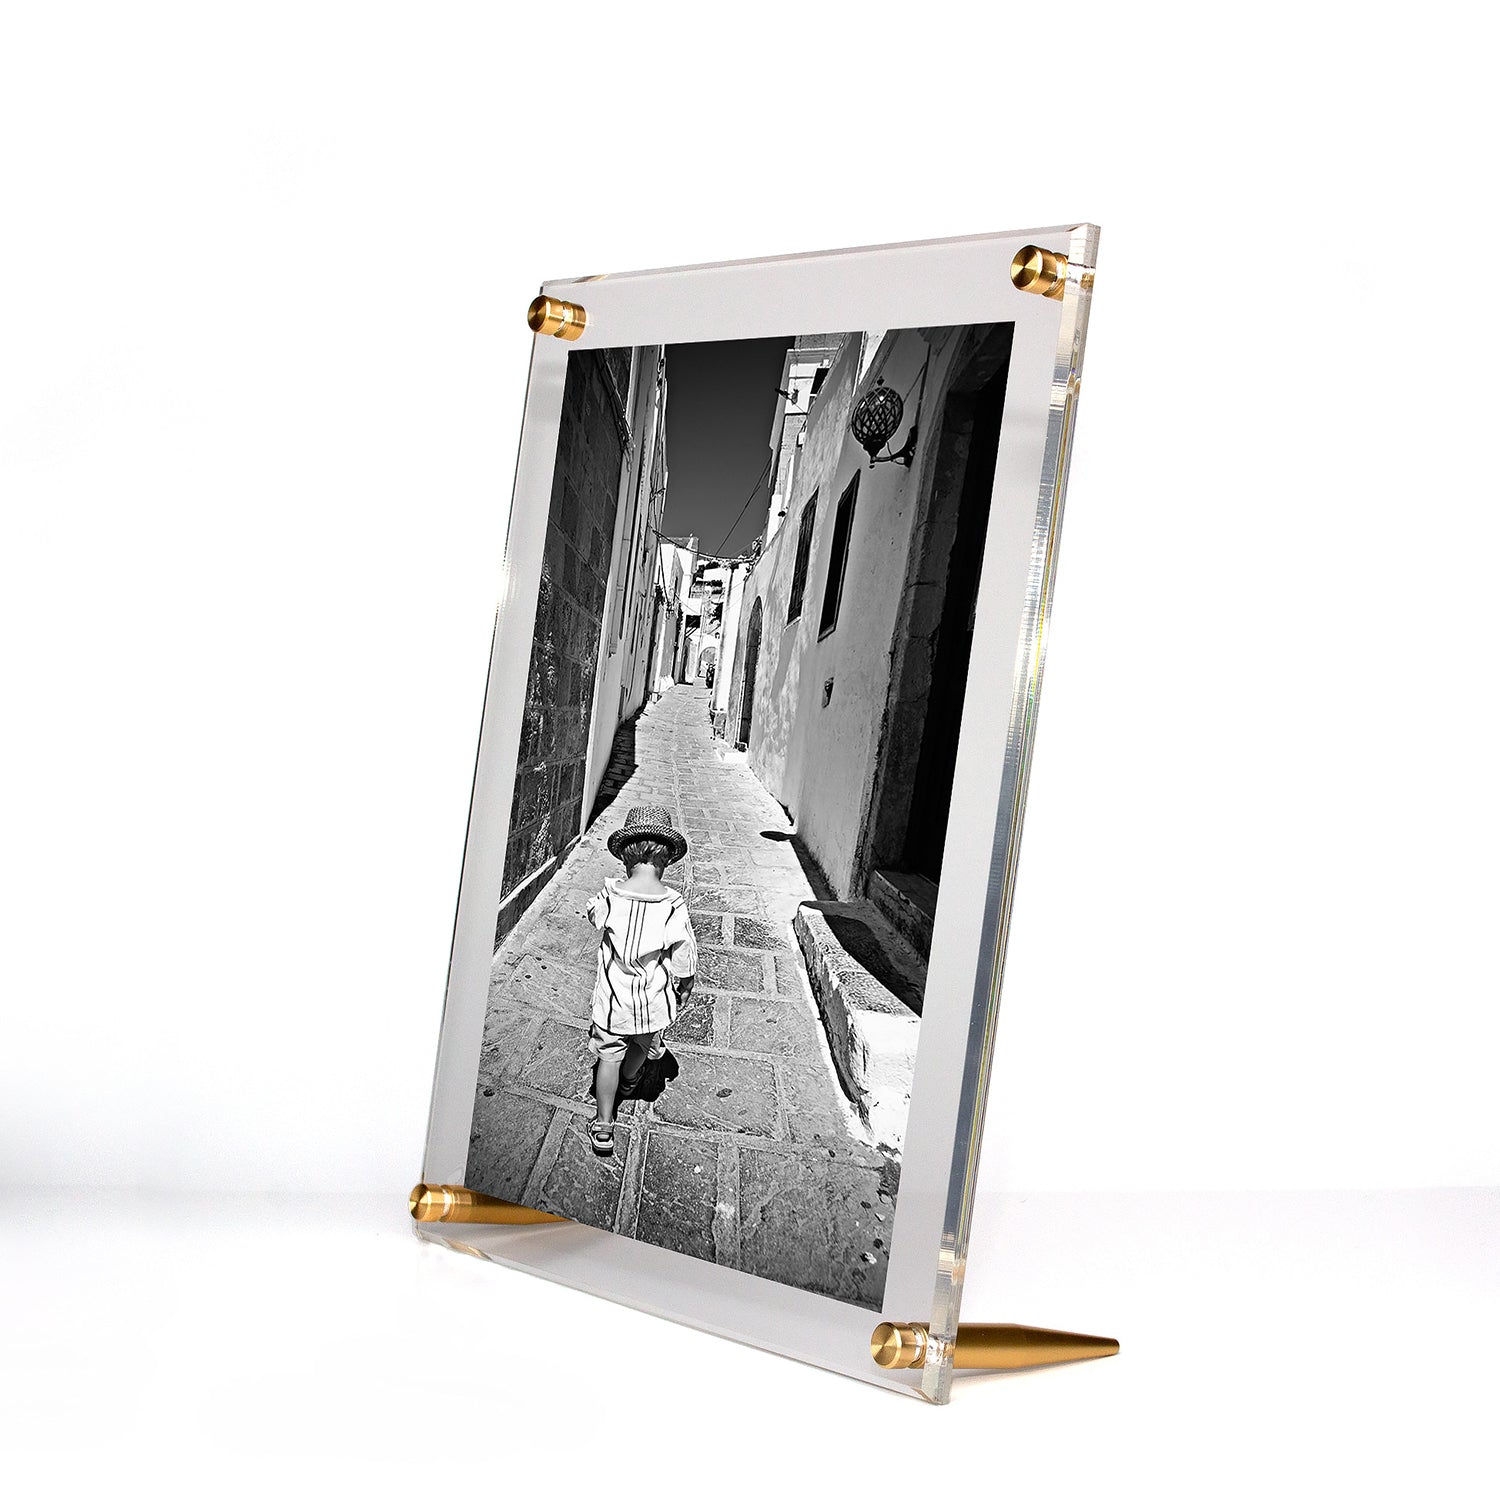 Wexel Art 34x44-Inch Double Panel Grade Acrylic Floating Frame with Silver Hardware for, 30x40-inch Art & Photos, Clear